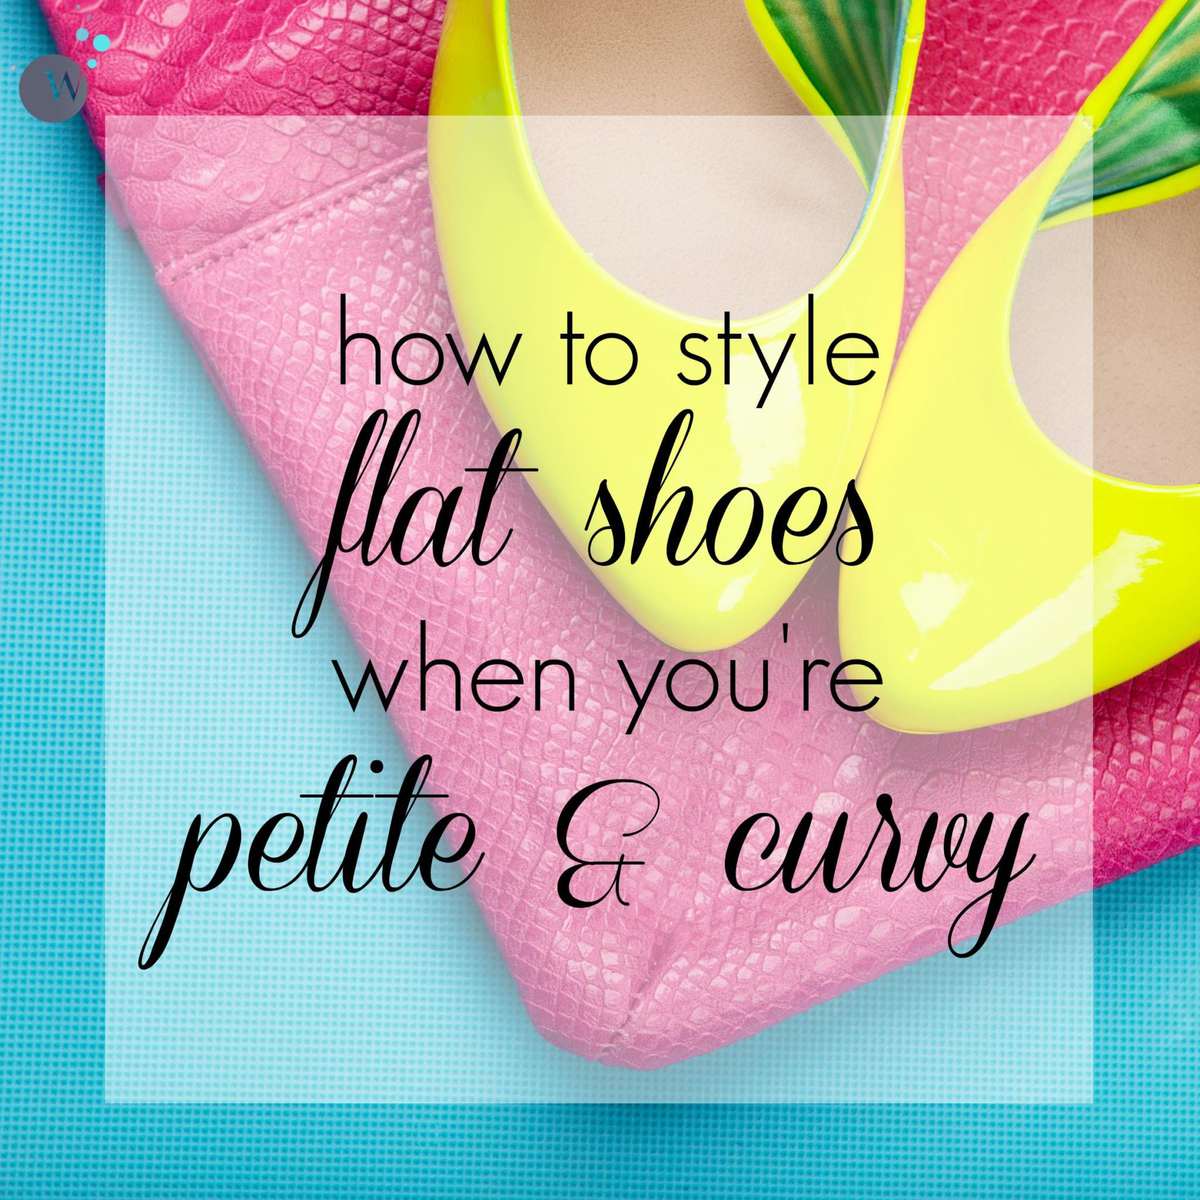 how to style flat shoes when youre petite and curvy